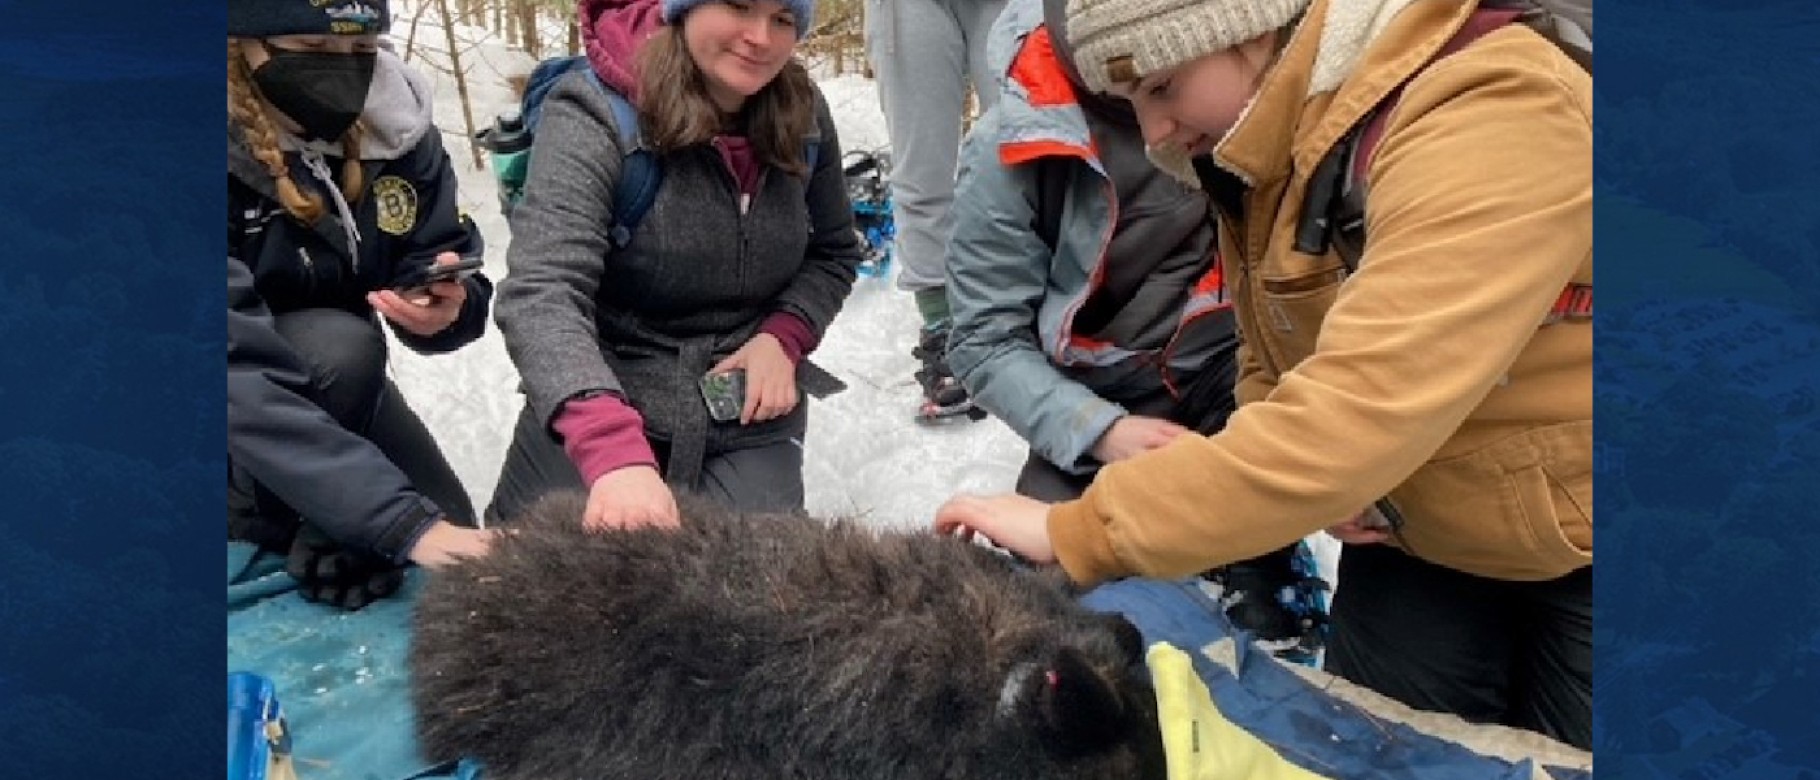 Students with bear cub